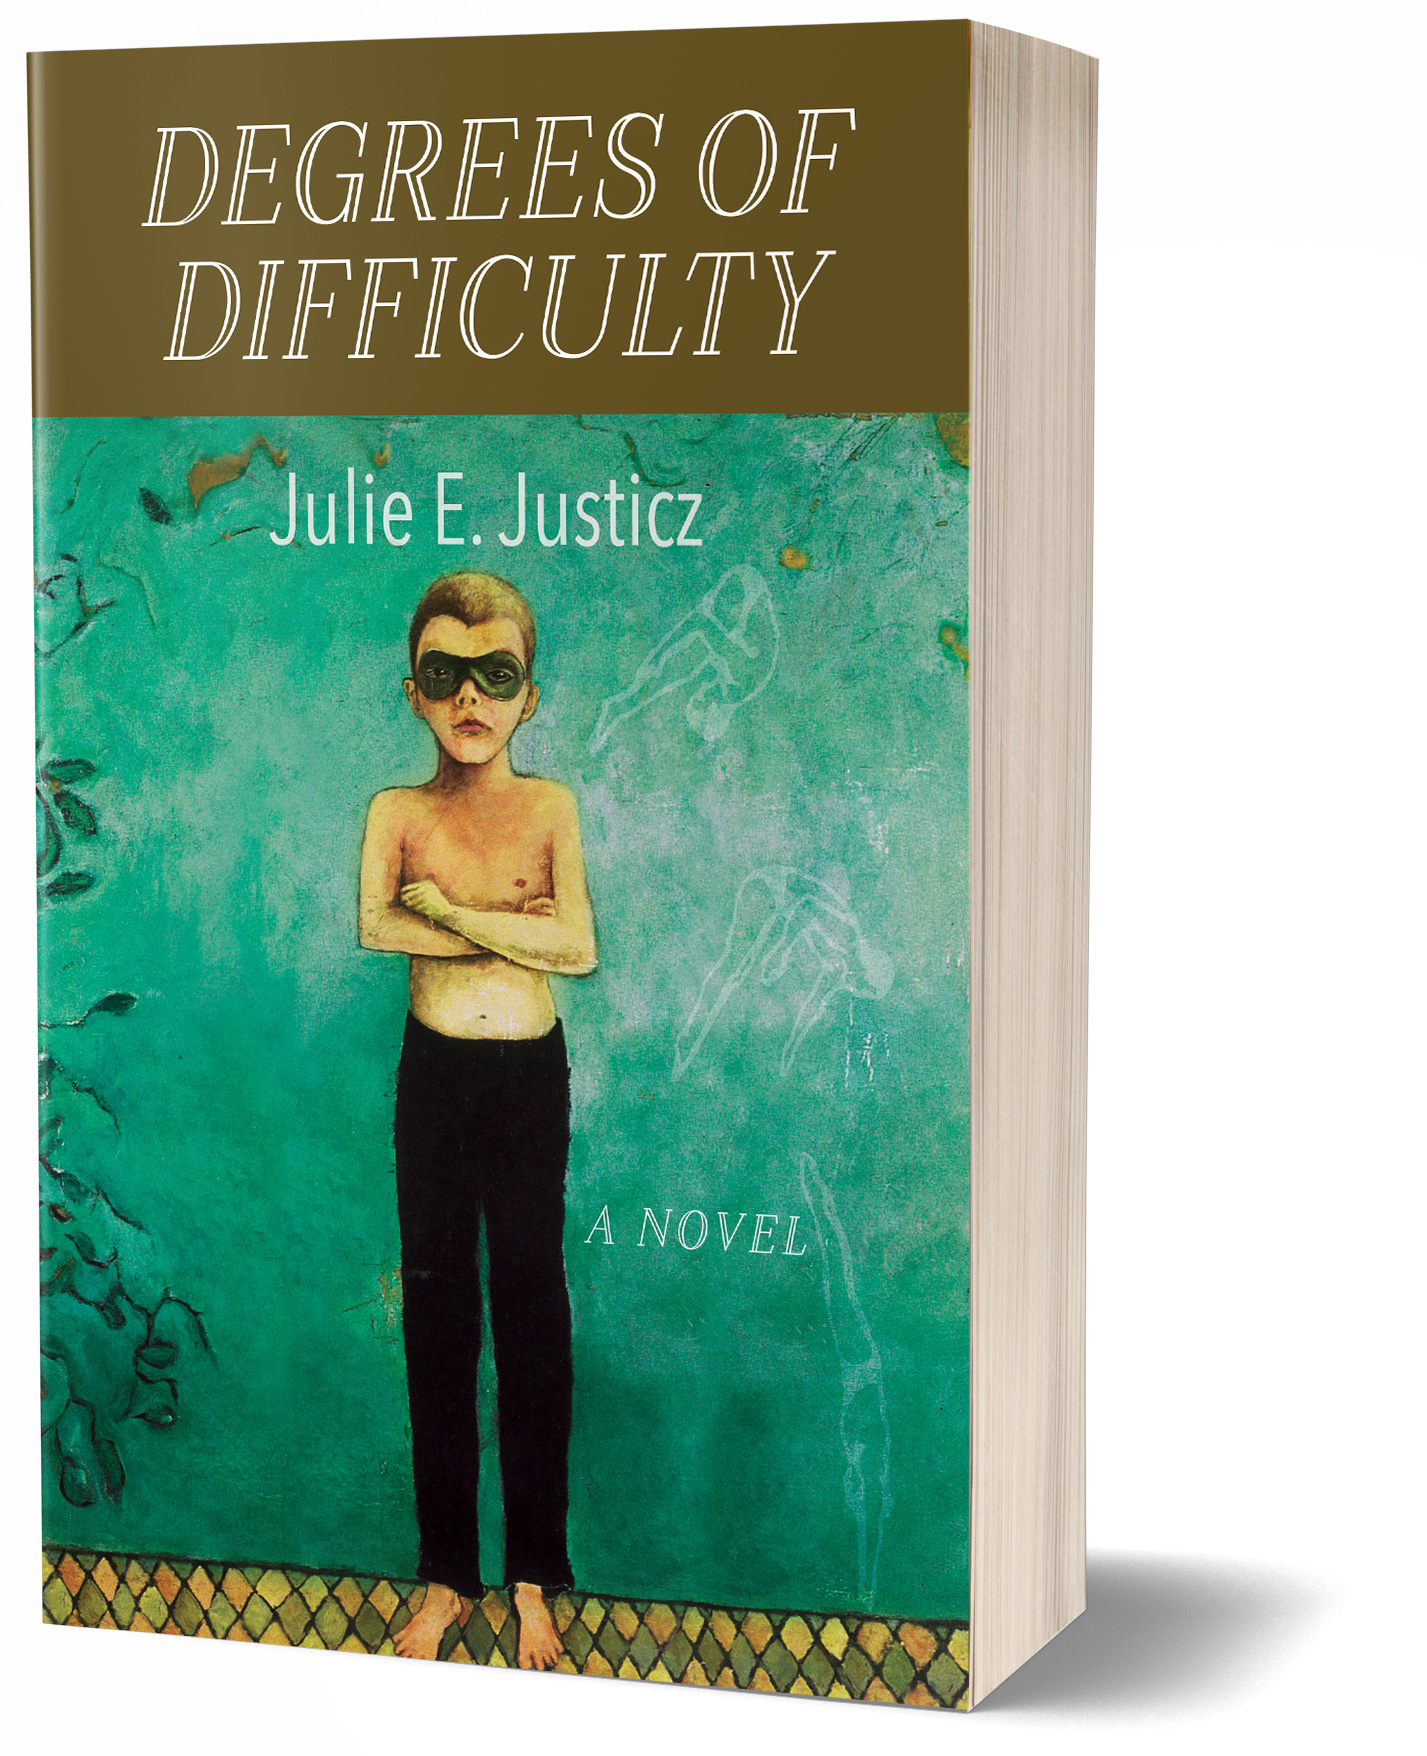 Degrees of Difficulty softcover book